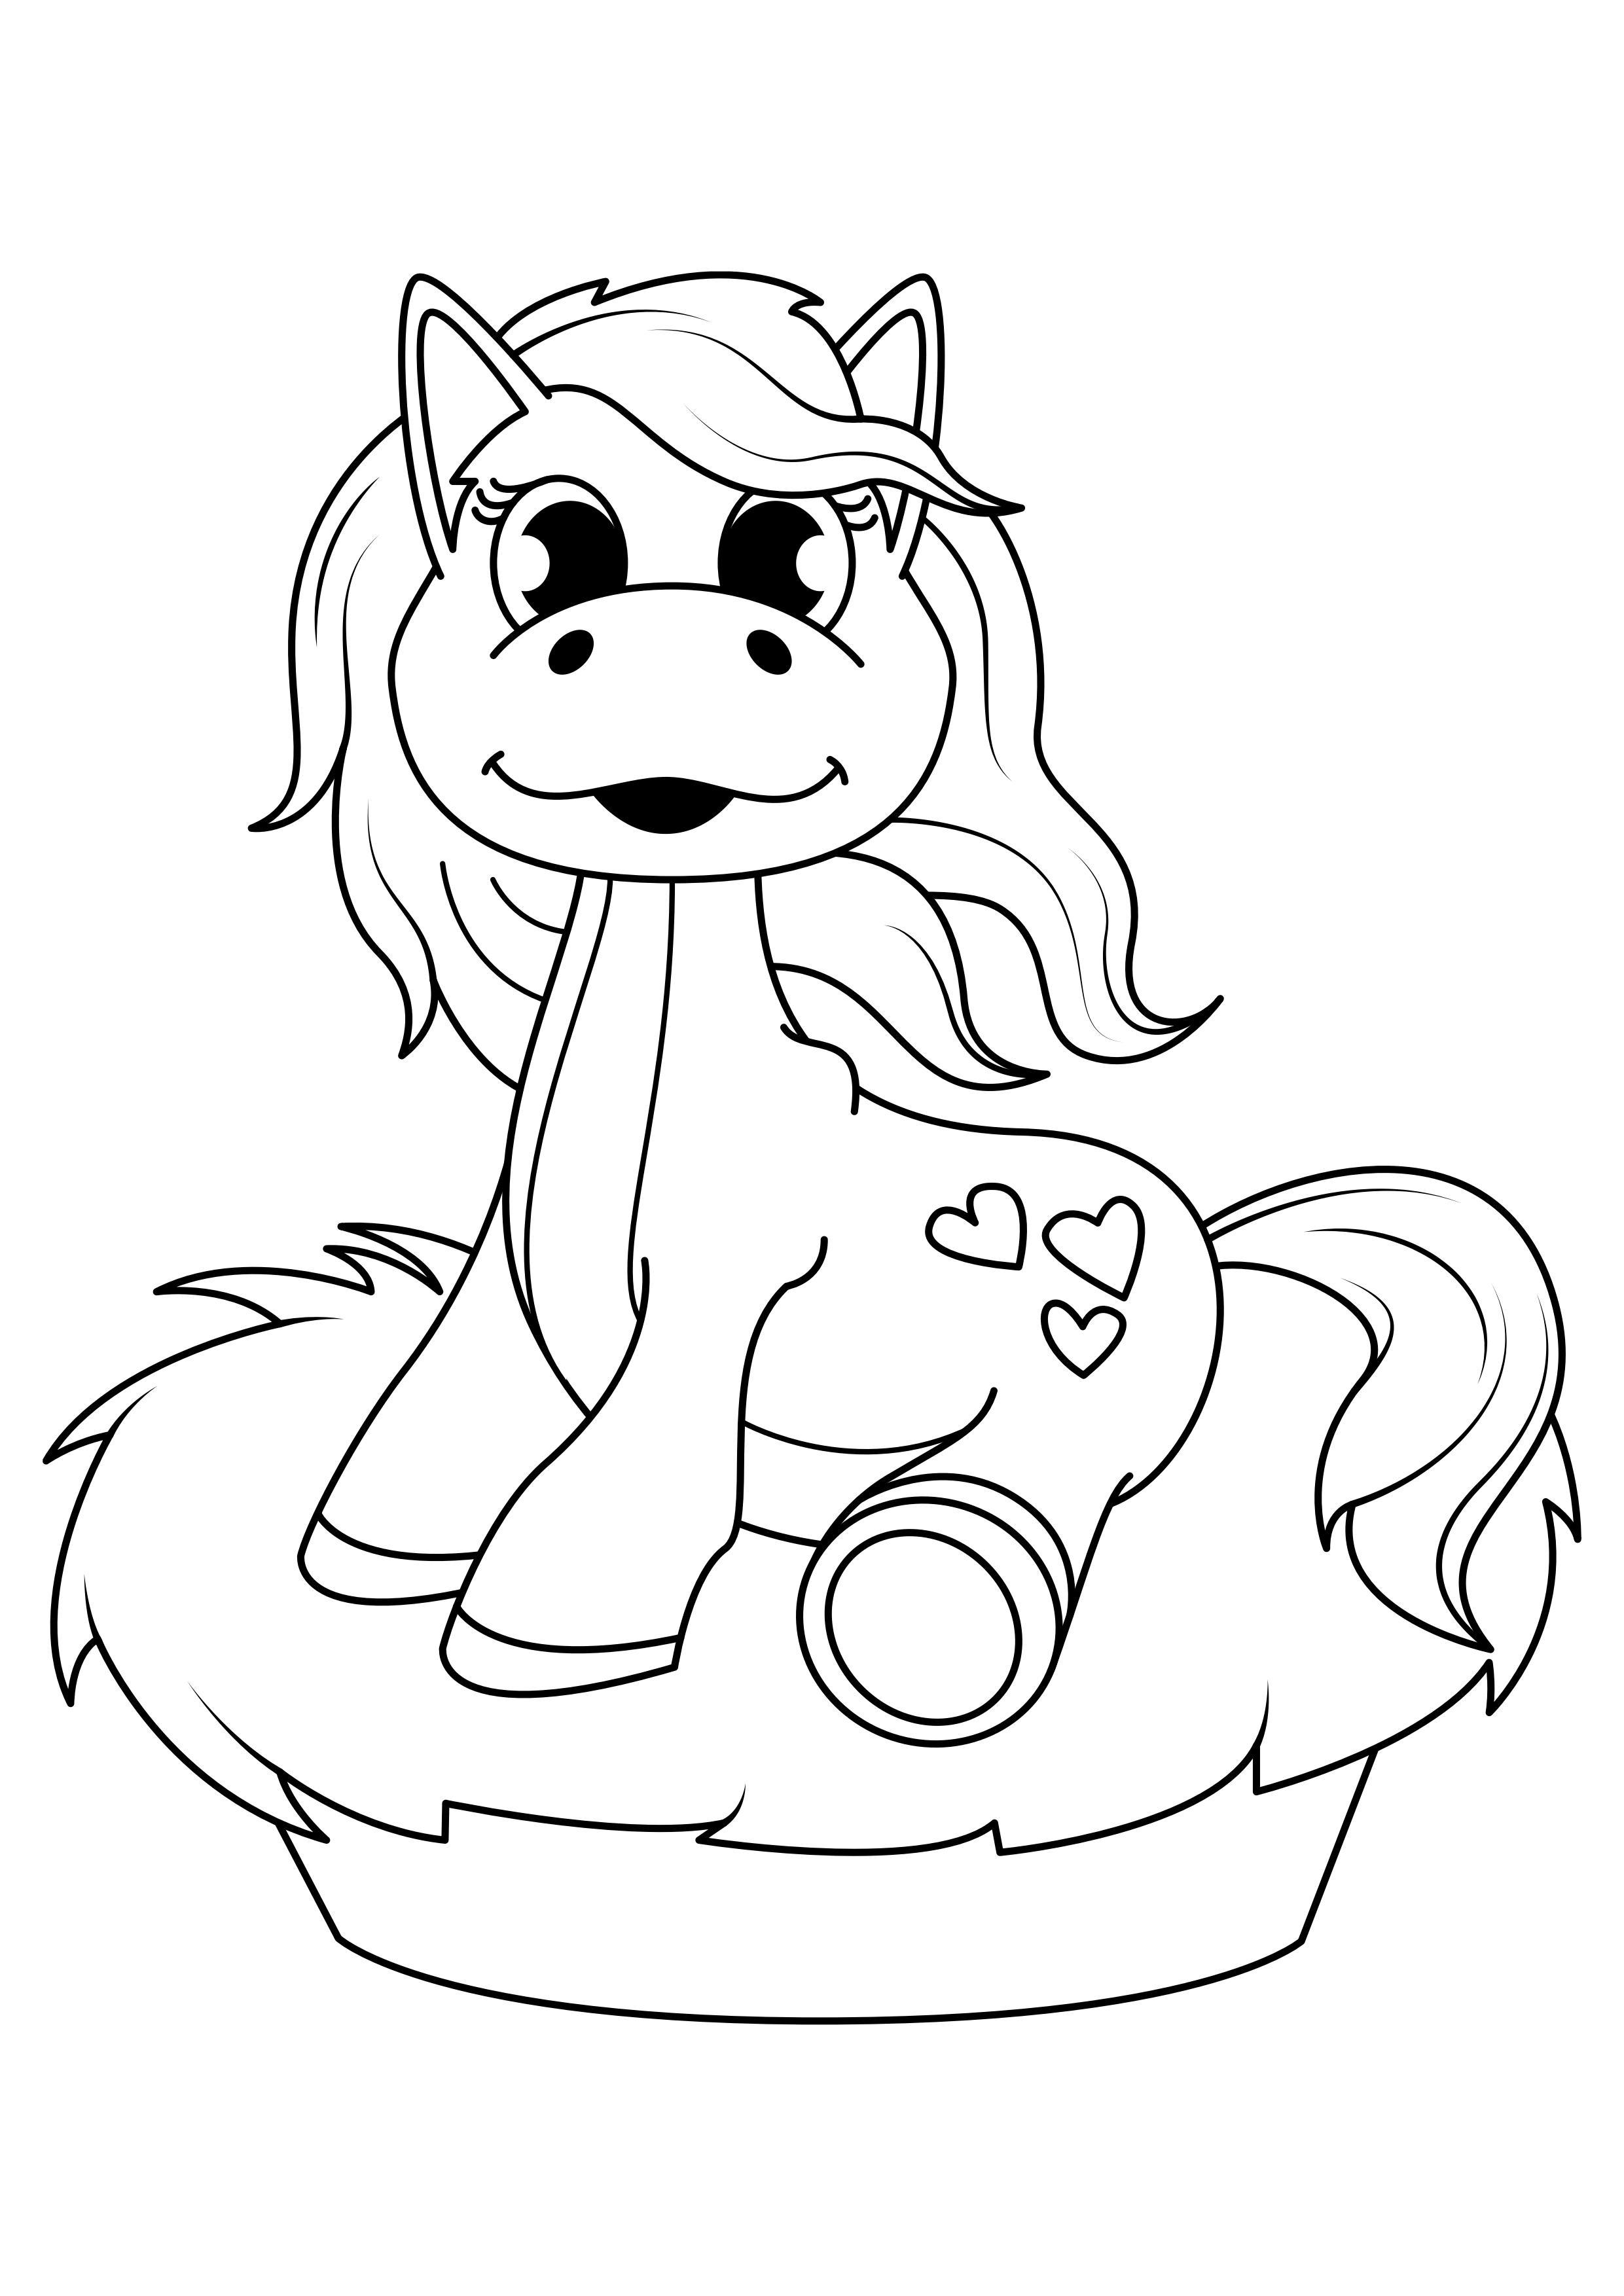 Coloring page horse in basket